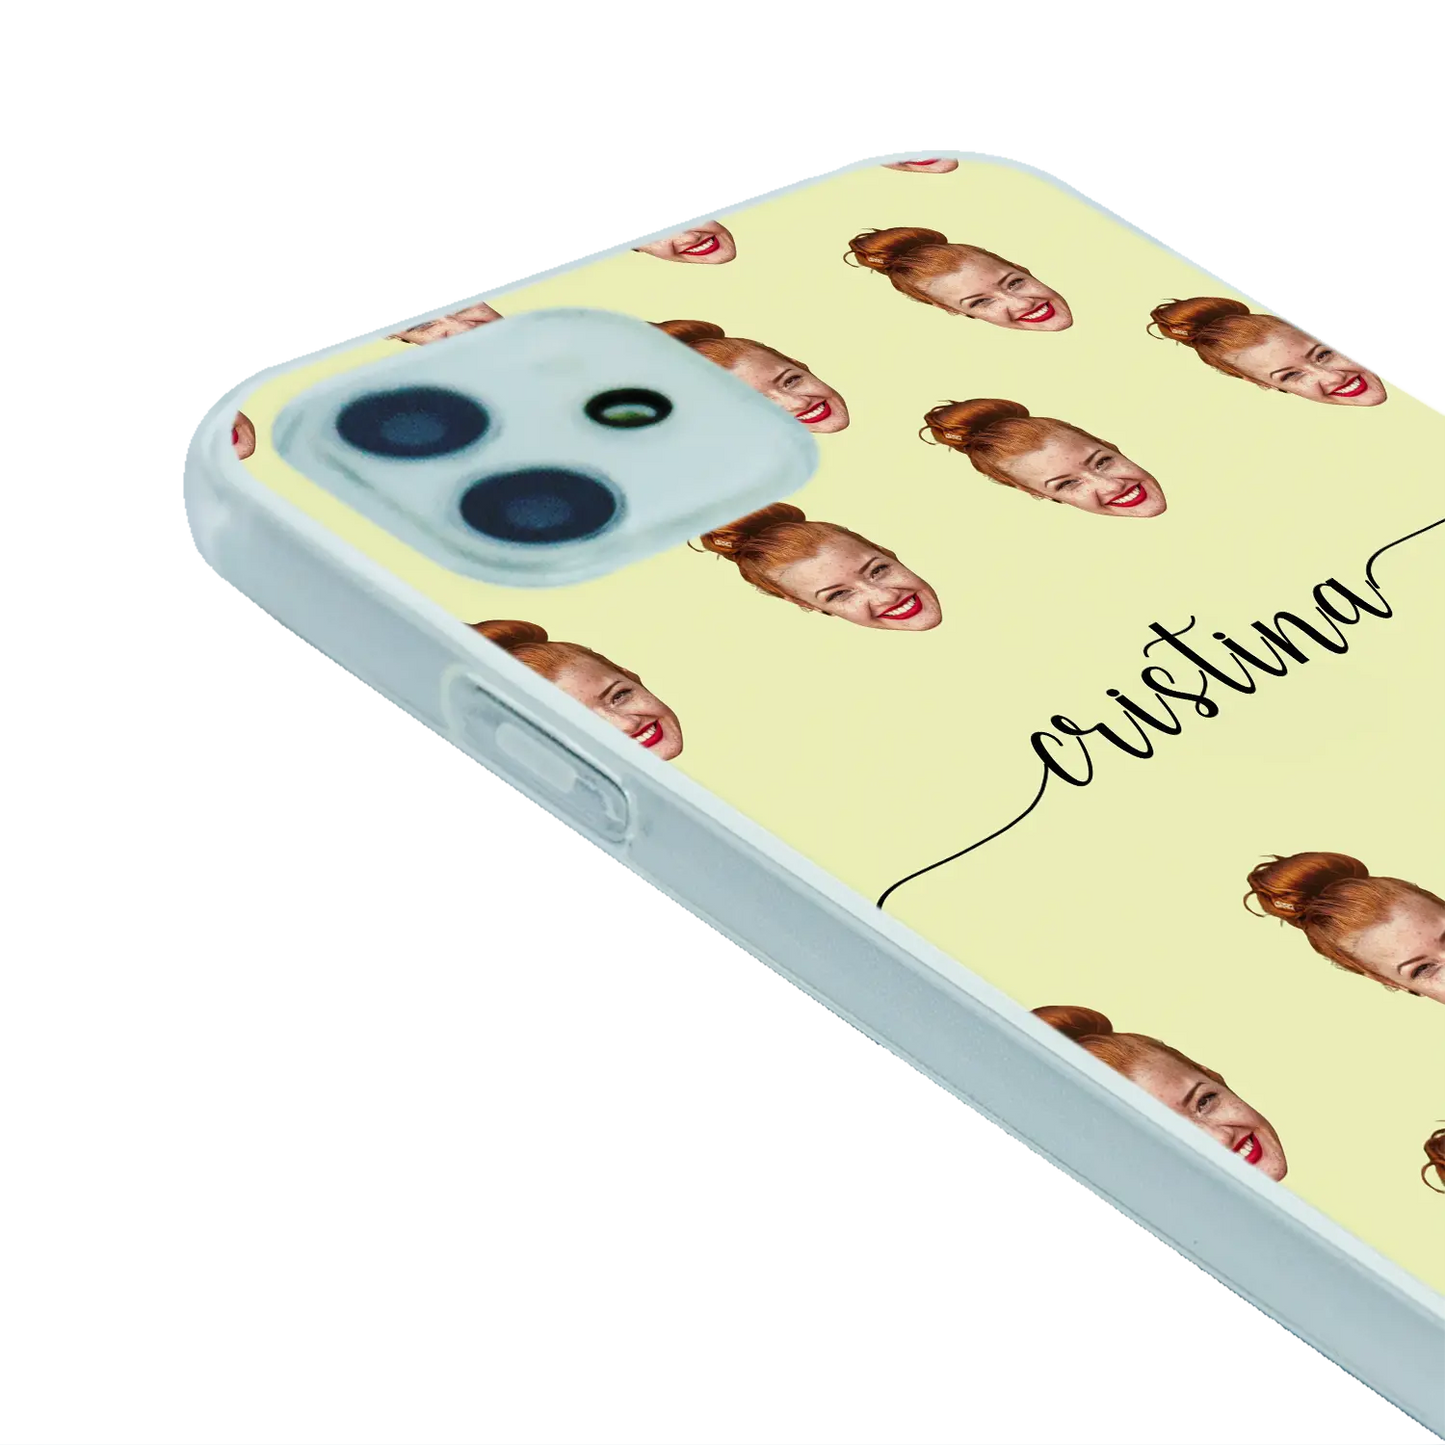 Face & Swirls - Personalised Galaxy A Case